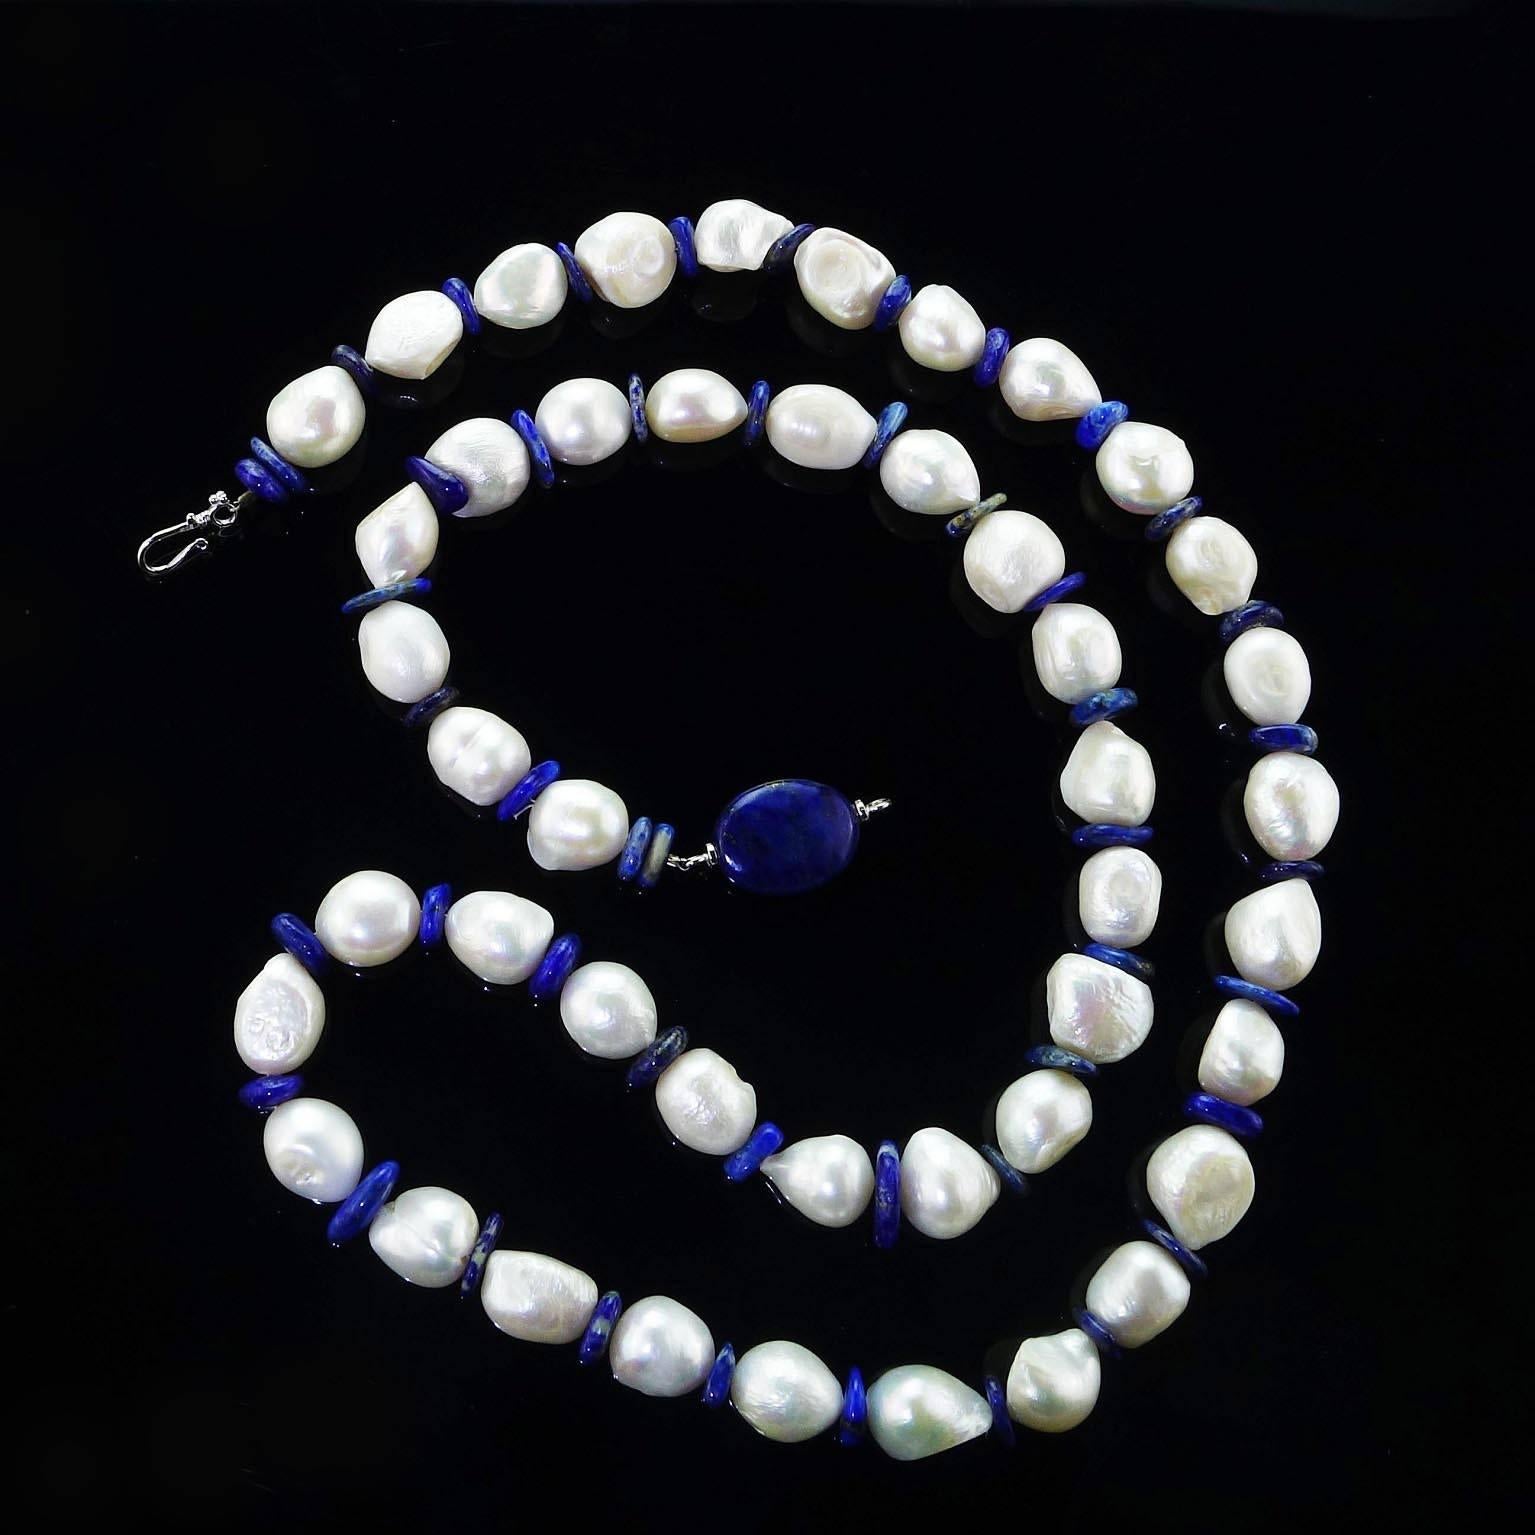 'Pearls are always appropriate'  Jackie Kennedy

This is a very versatile custom made, Large, White Freshwater Ripple Pearl (10-13mm) Necklace spaced with Lapis Lazuli discs. The complementary Lapis Lazuli Clasp can be adjusted to be a focal. Wrap